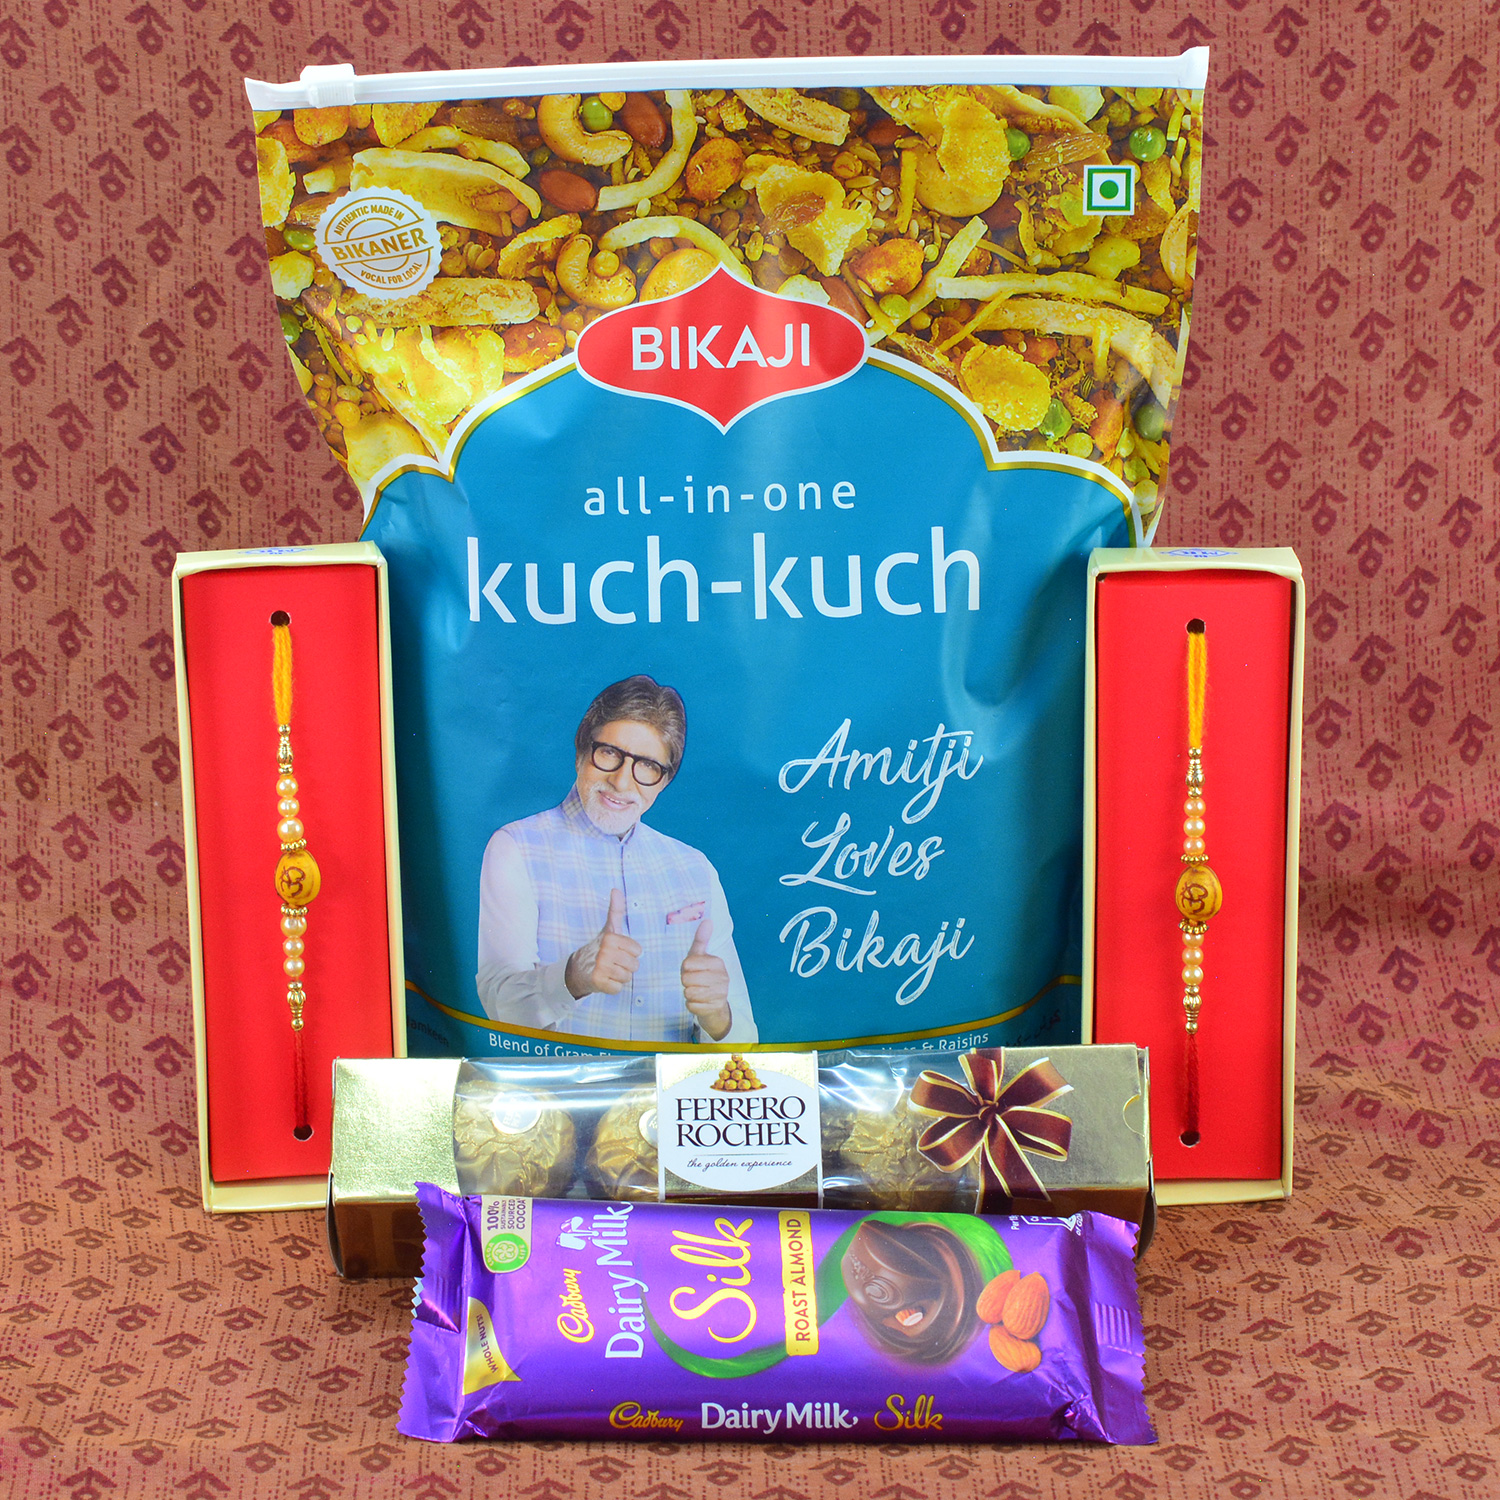 Marvellous 2 Pear Rakhi with Awesome Dairy Milk with Ferrero Rocher and acrid Bikaji all in one kuch kuch